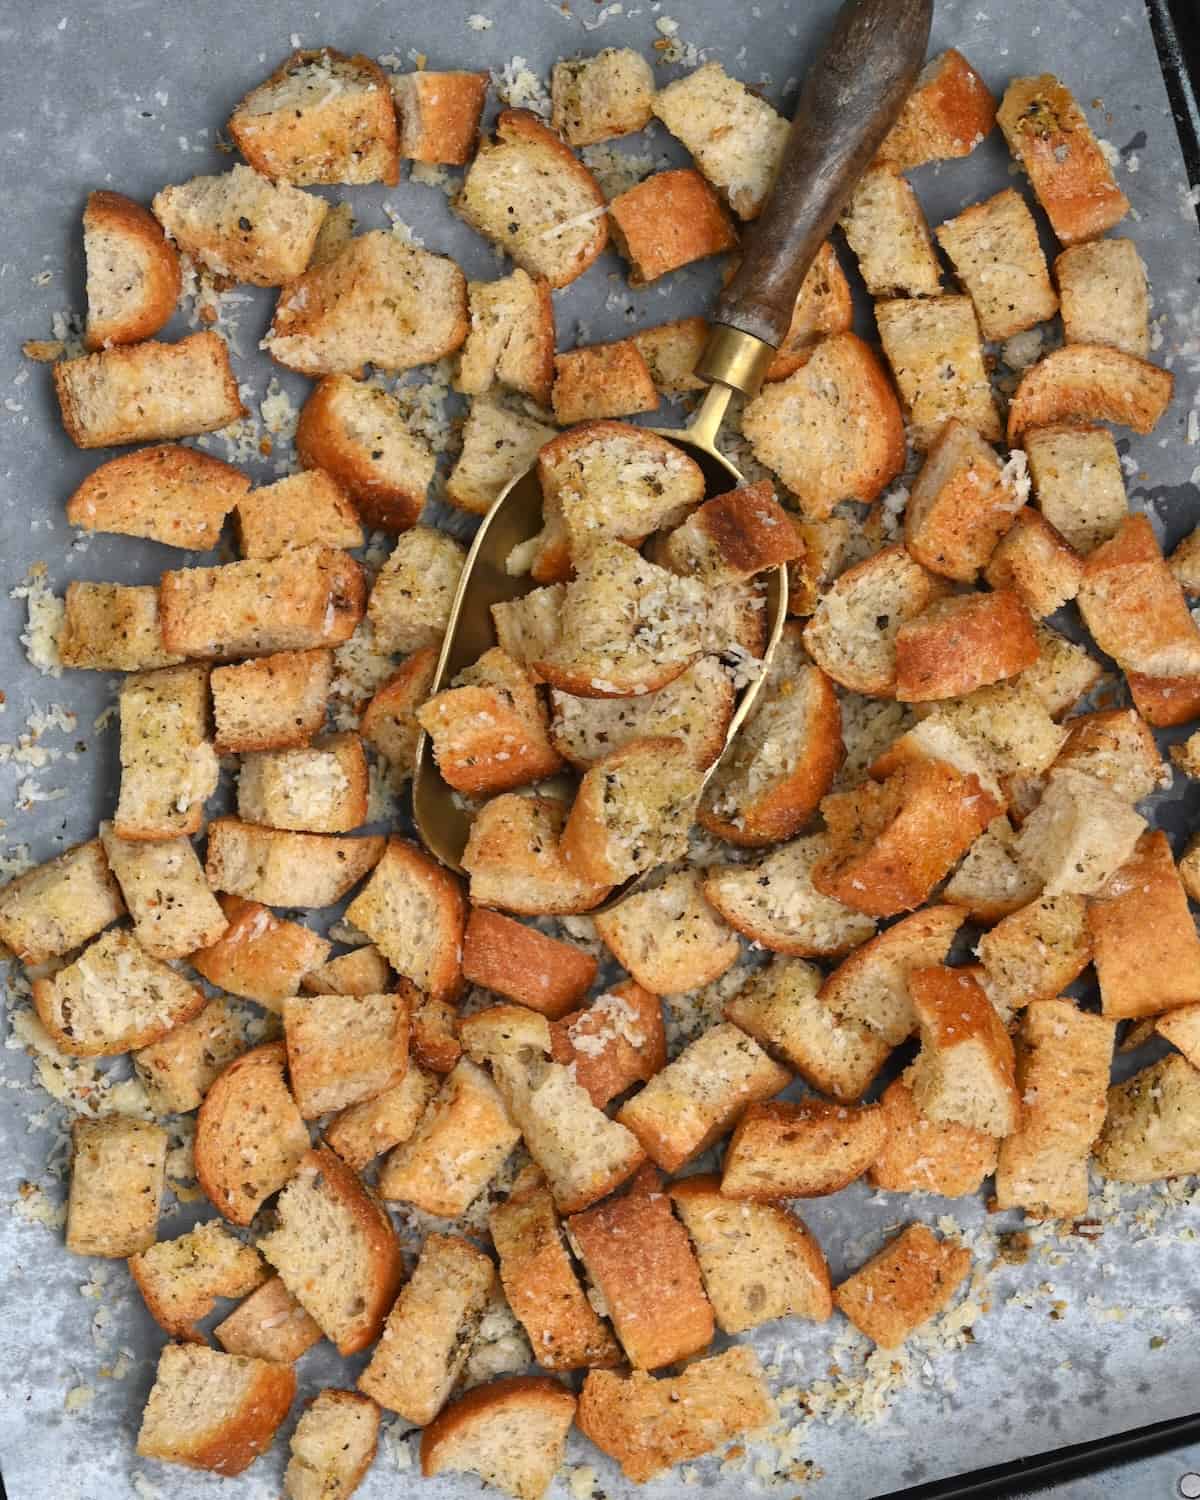 Homemade croutons topped with parmesan on a baking tray